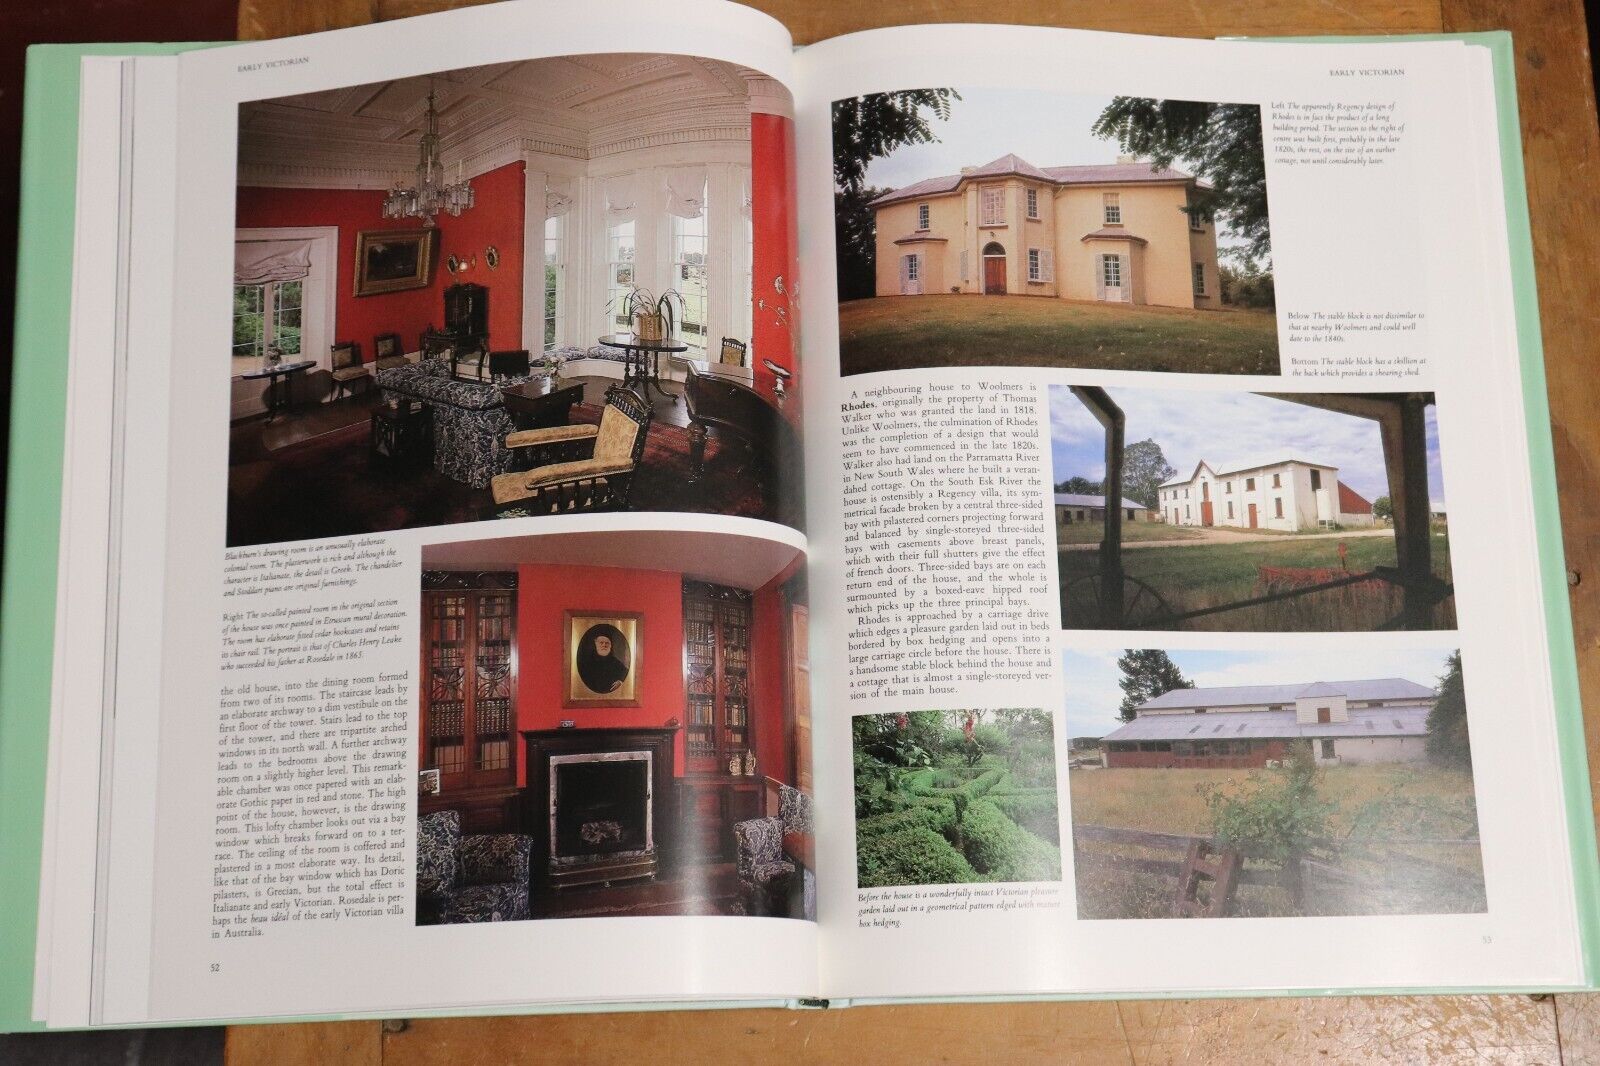 Australian Country Houses - 1987 - Australian History & Architecture Book